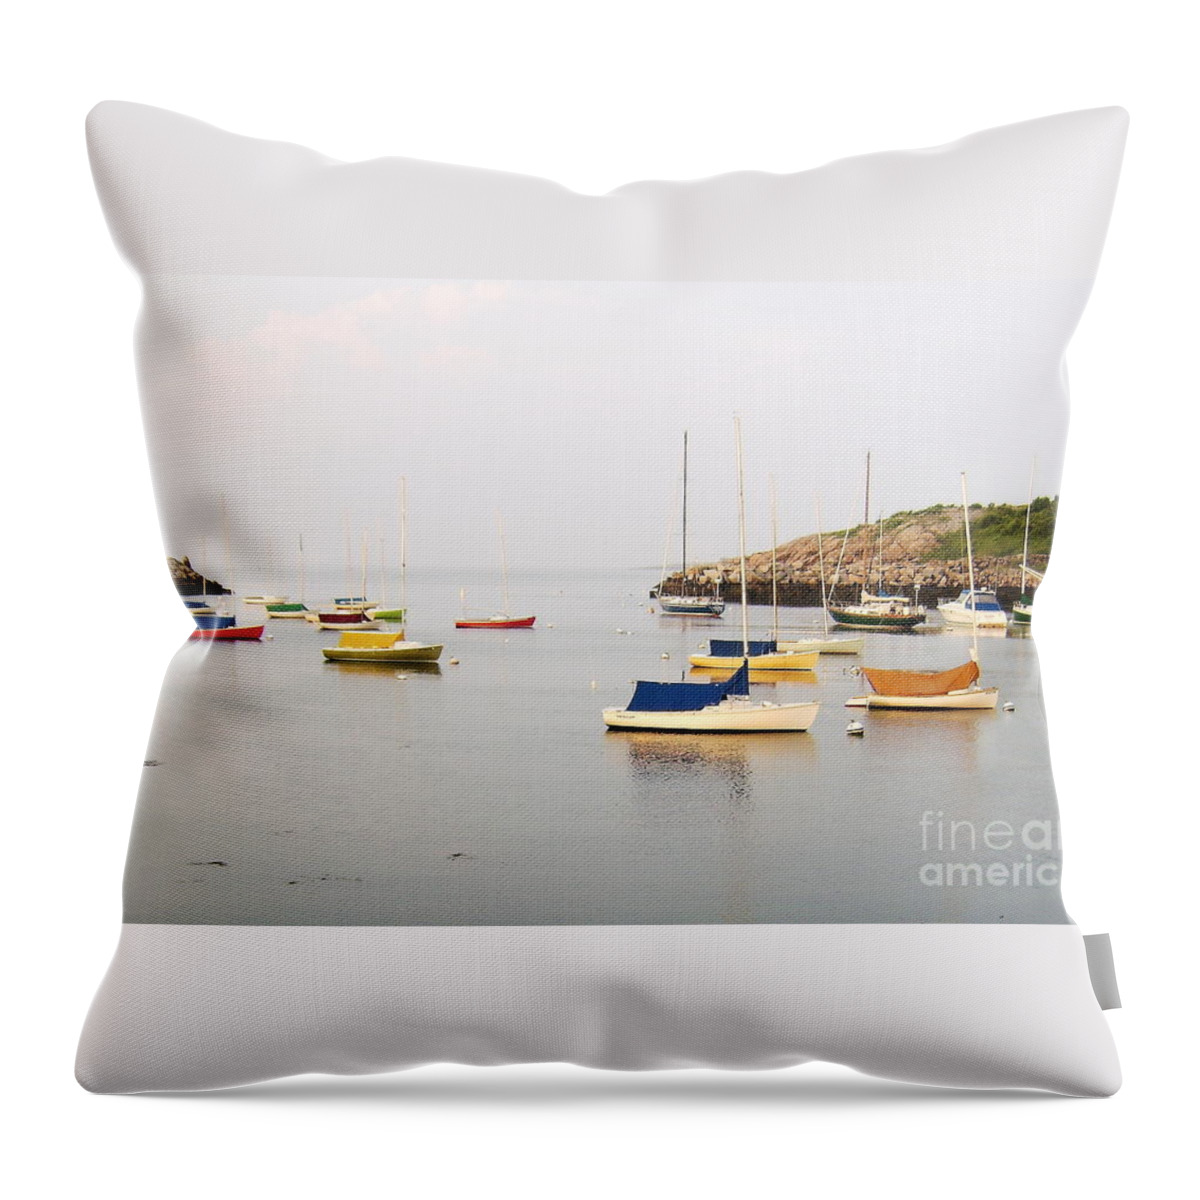 Saint Andrews Throw Pillow featuring the photograph The Beautiful and Colorful Sails At Rest in a Calm and Quiet Harbor by Brad Knorr Art